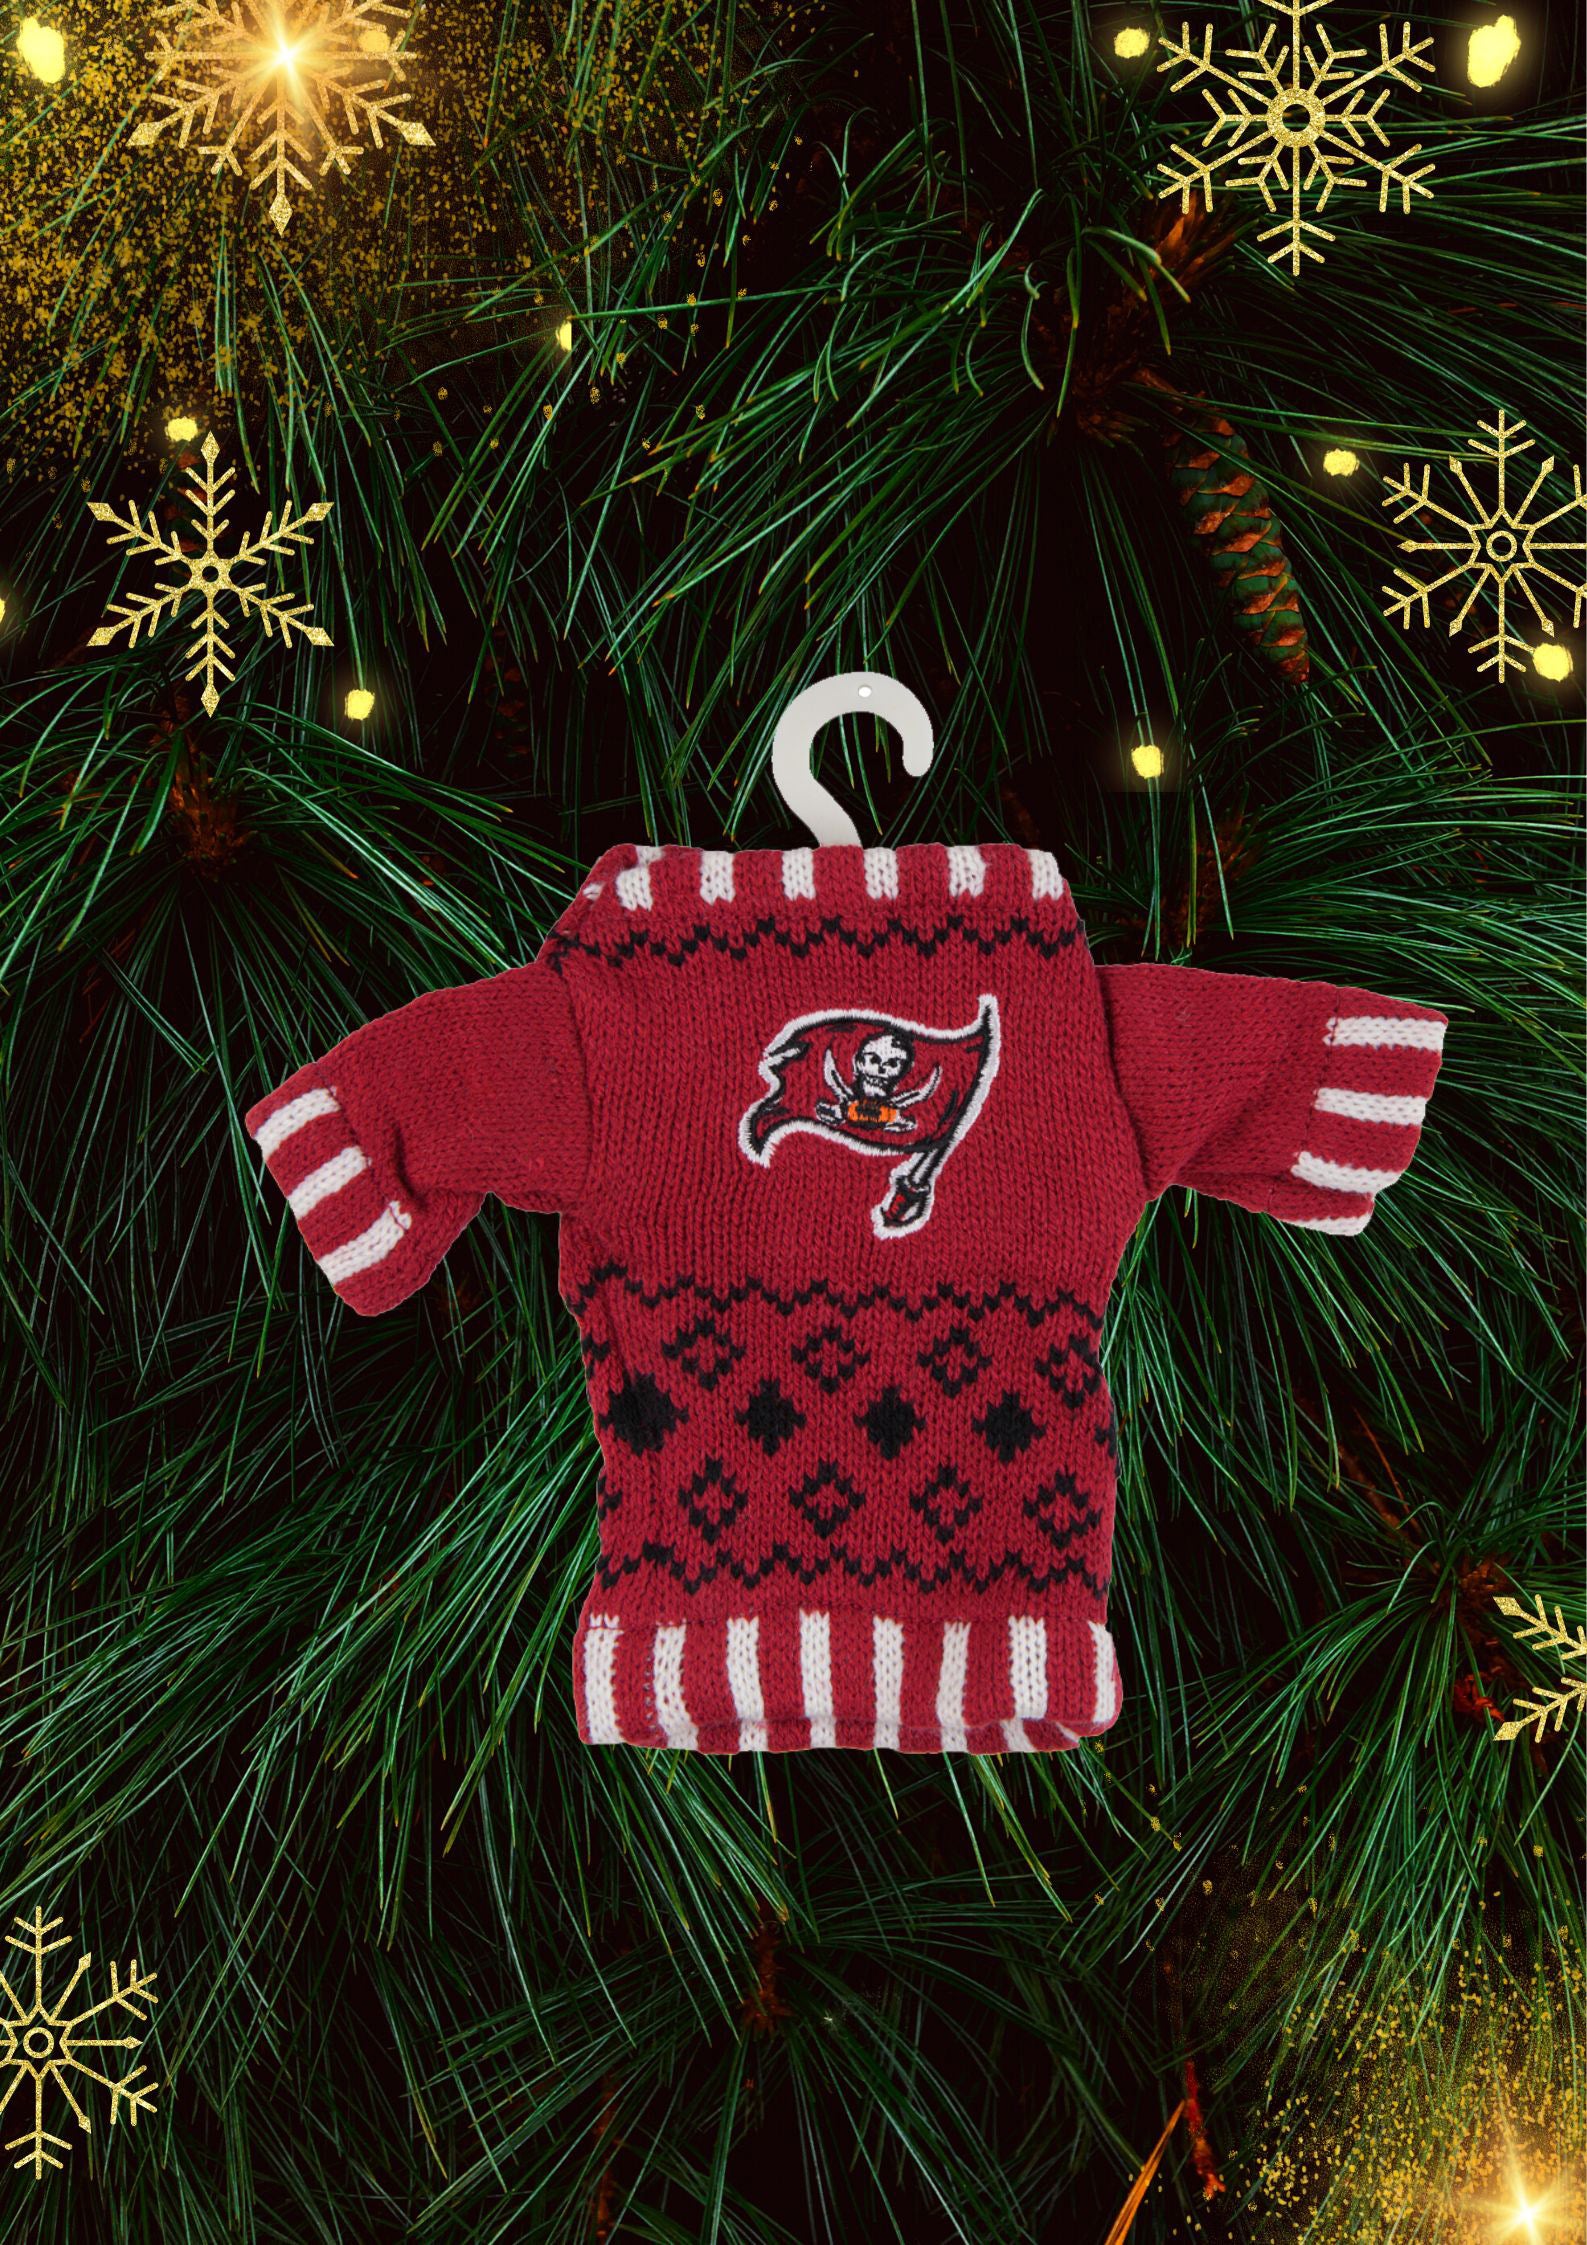 Tampa Bay Buccaneers - Knit Sweater Ornament 6 Pack - OS / Multicoloured